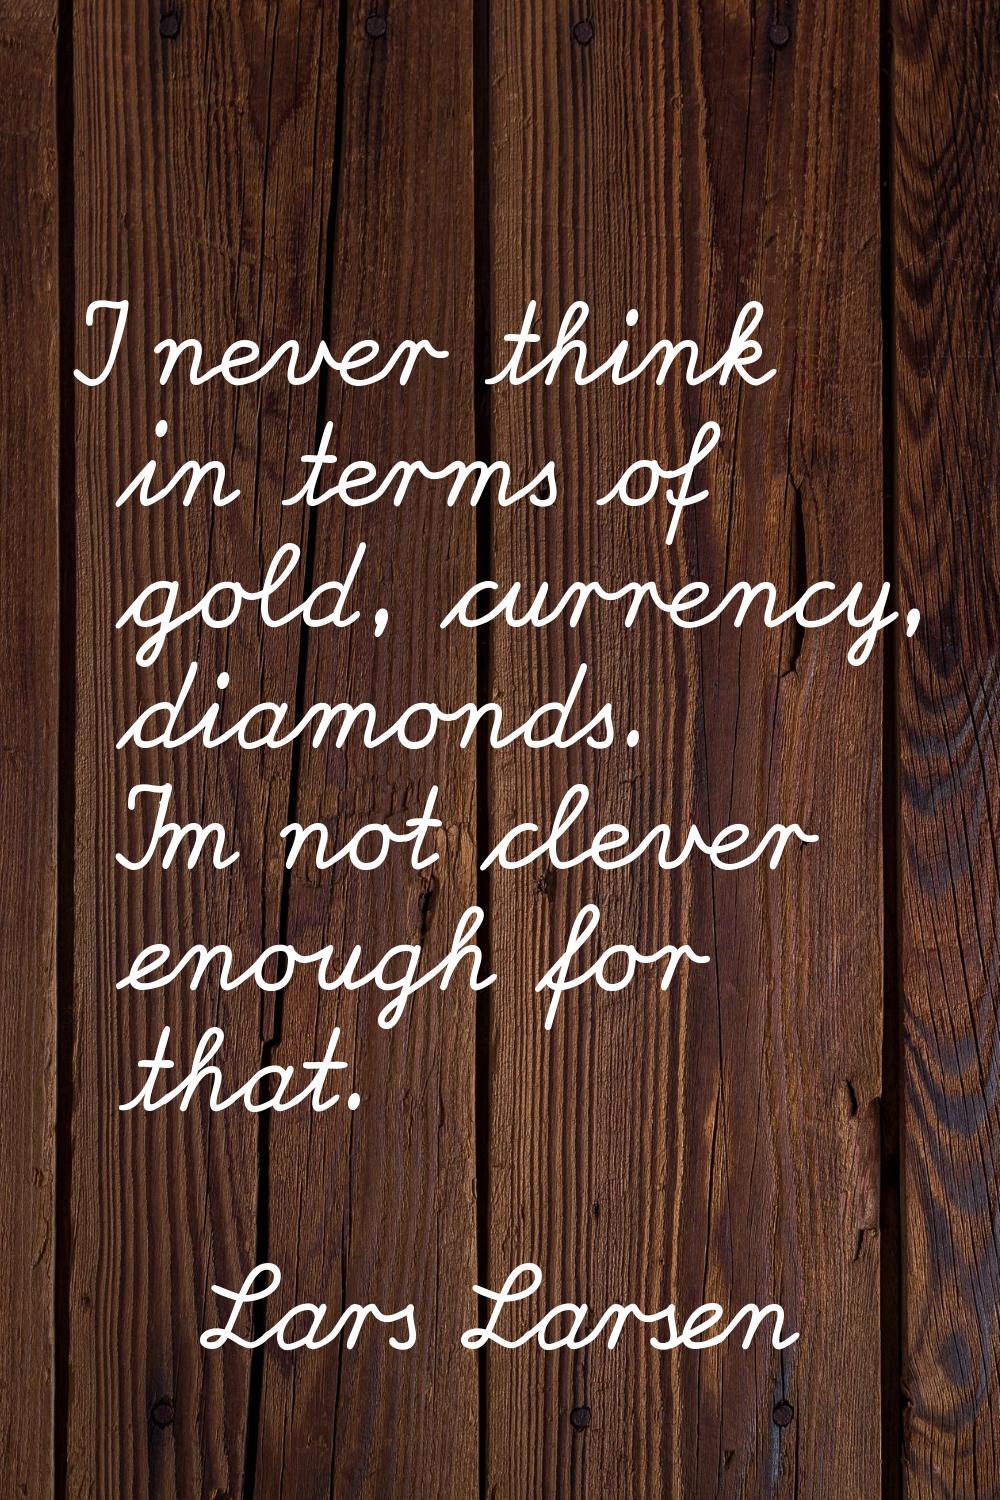 I never think in terms of gold, currency, diamonds. I'm not clever enough for that.